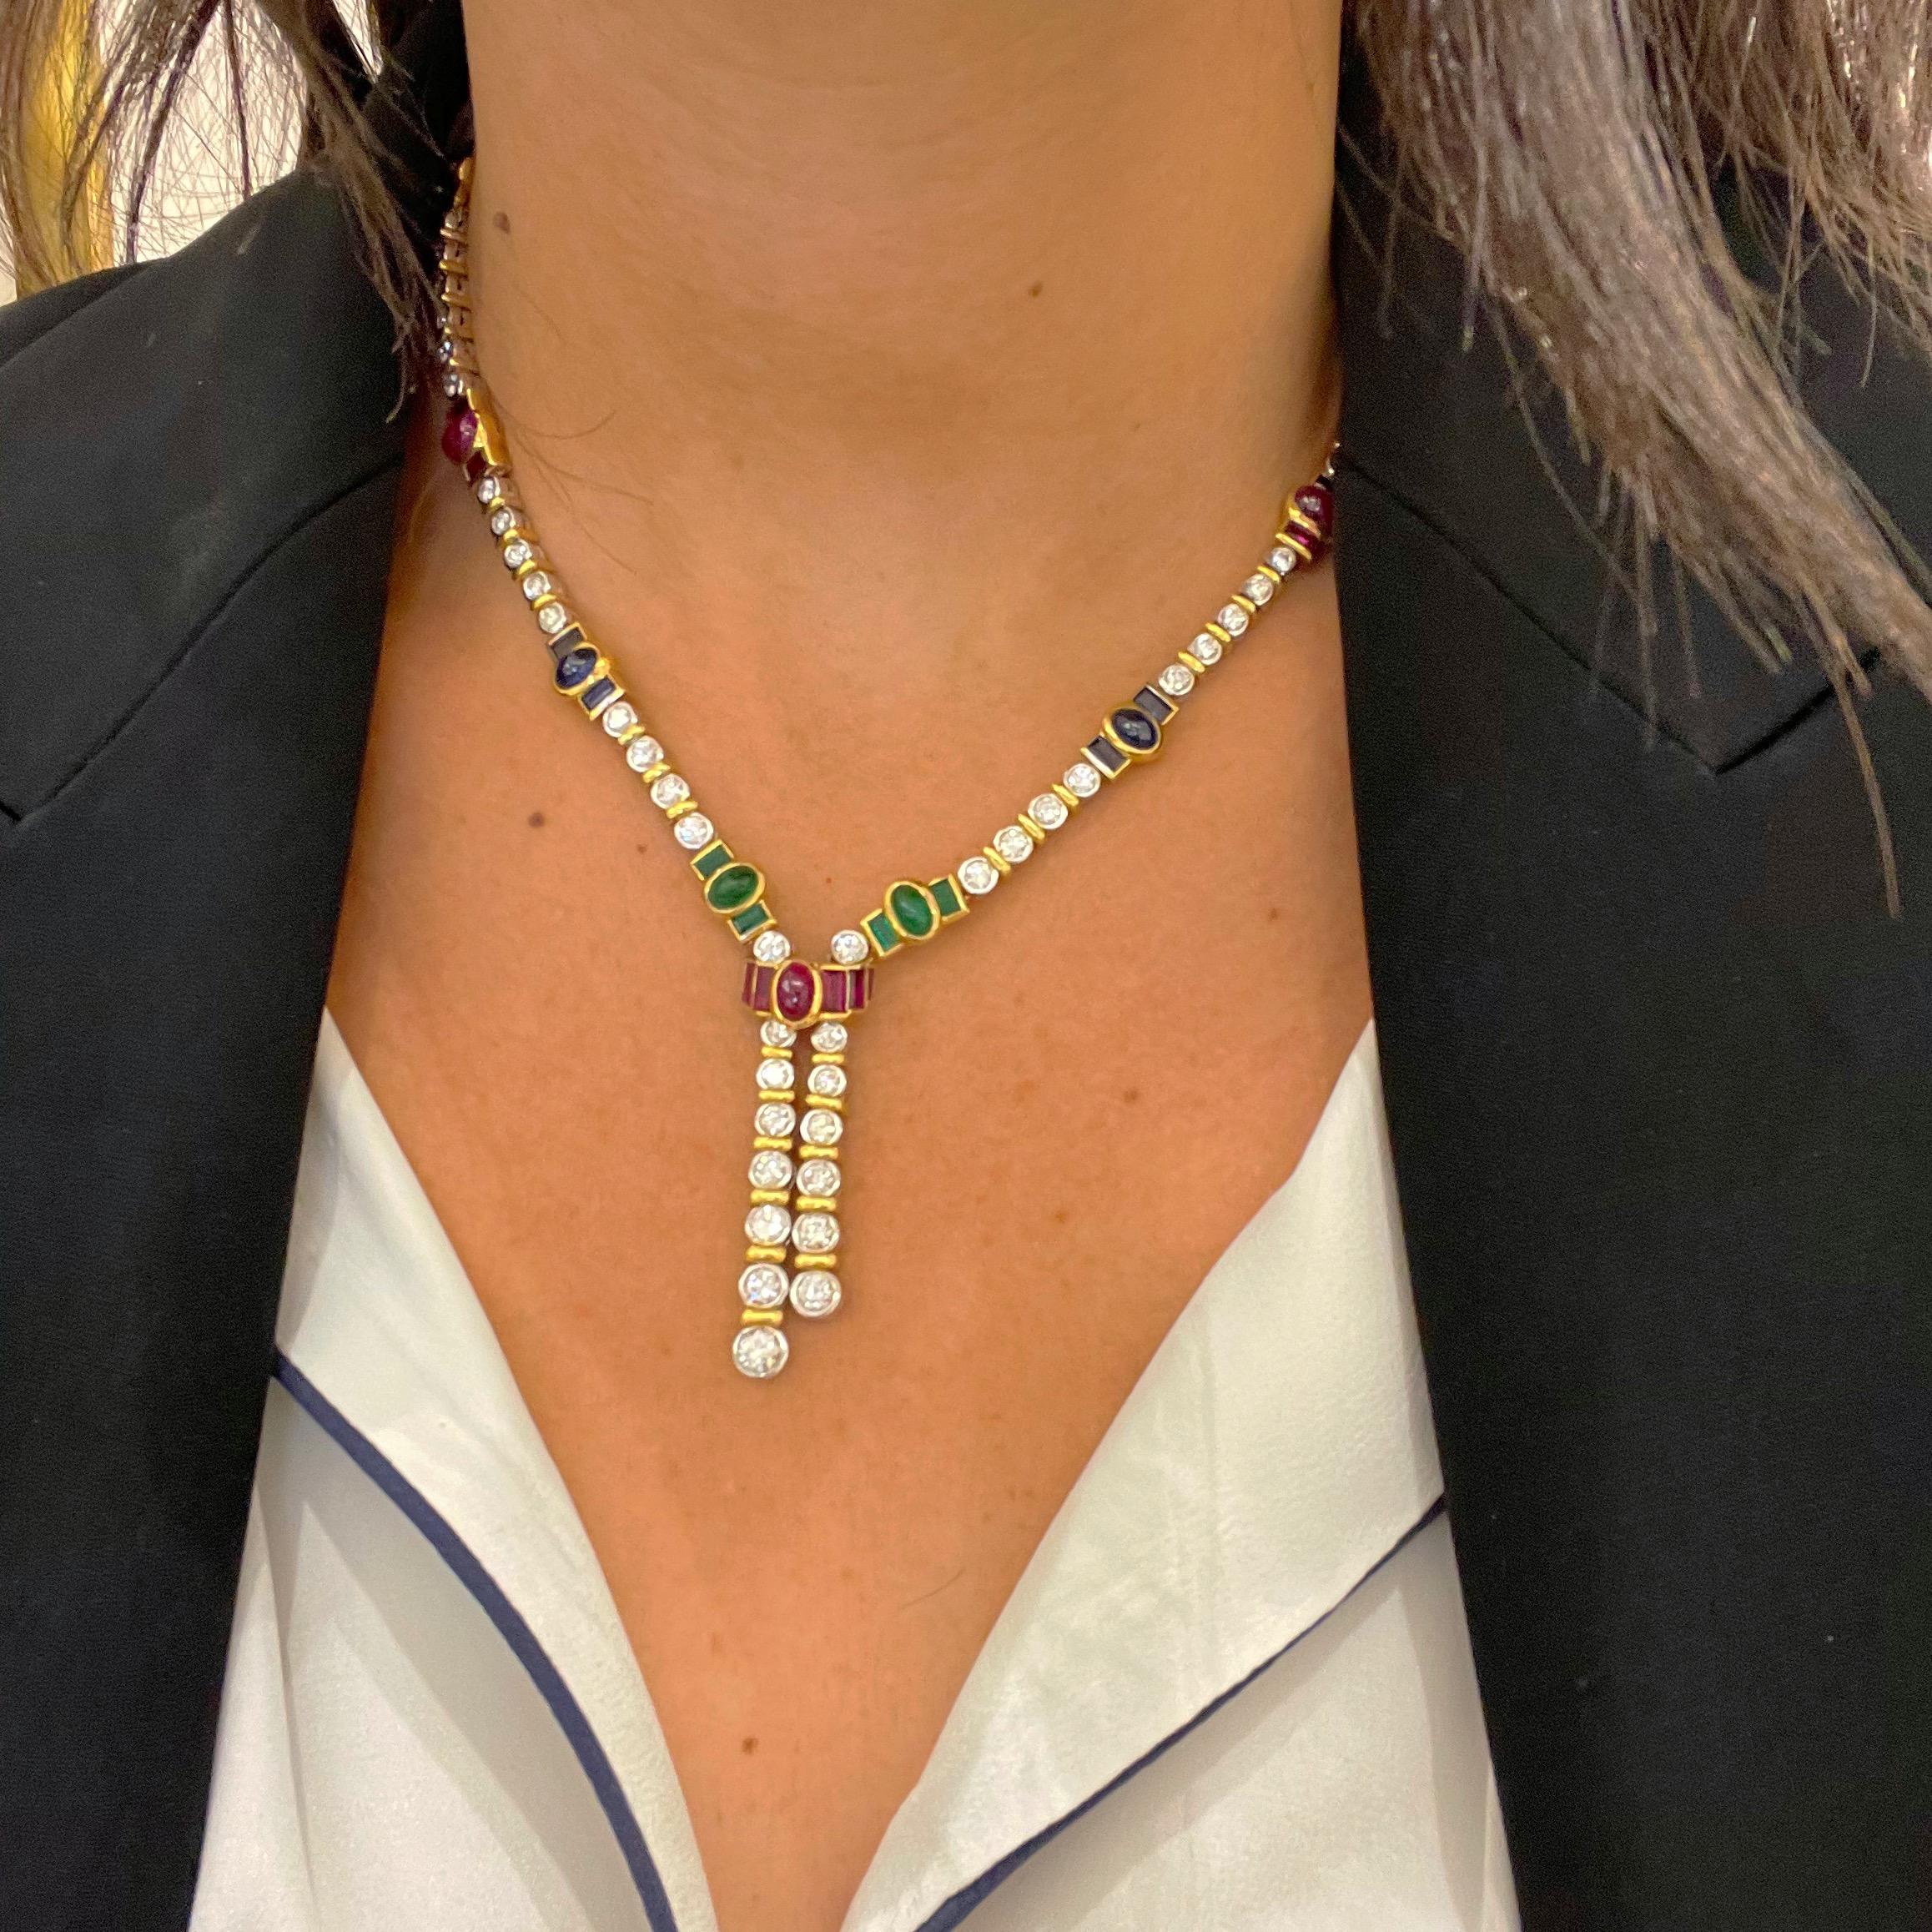 Designed by Barzizza of Valenza, Italy.  Founded in 1958 the firm produces very limited series of unique jewelry pieces.This 18 karat white and yellow gold lariat style necklace is the perfect example of their quality workmanship.
White gold bezel